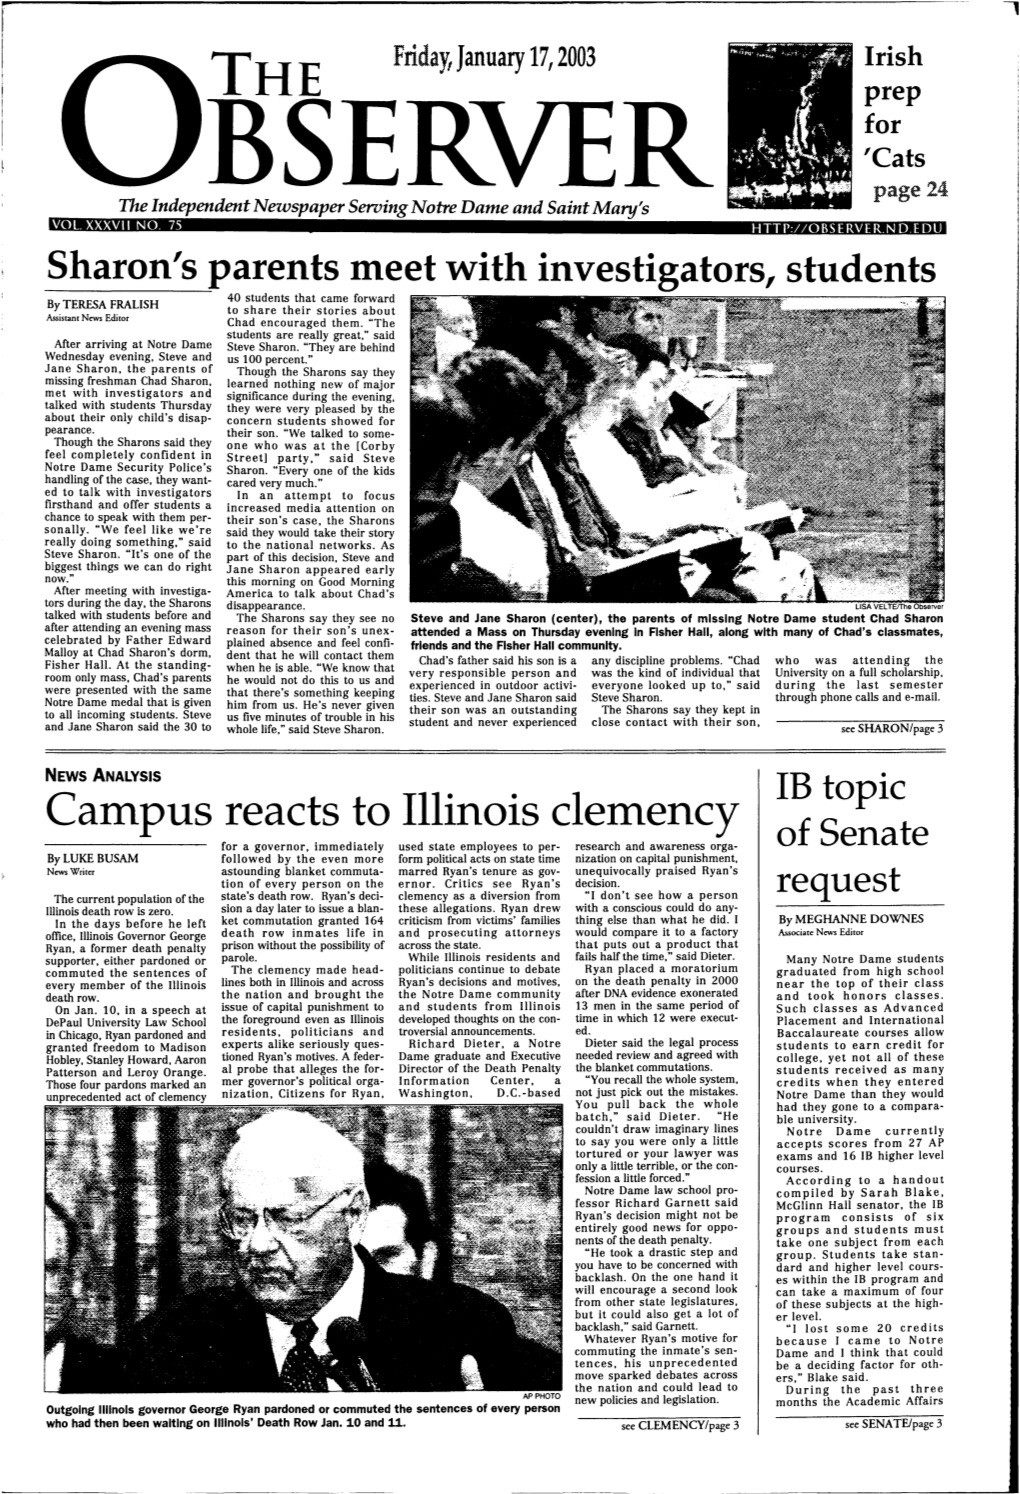 Campus Reacts to Illinois Clemency